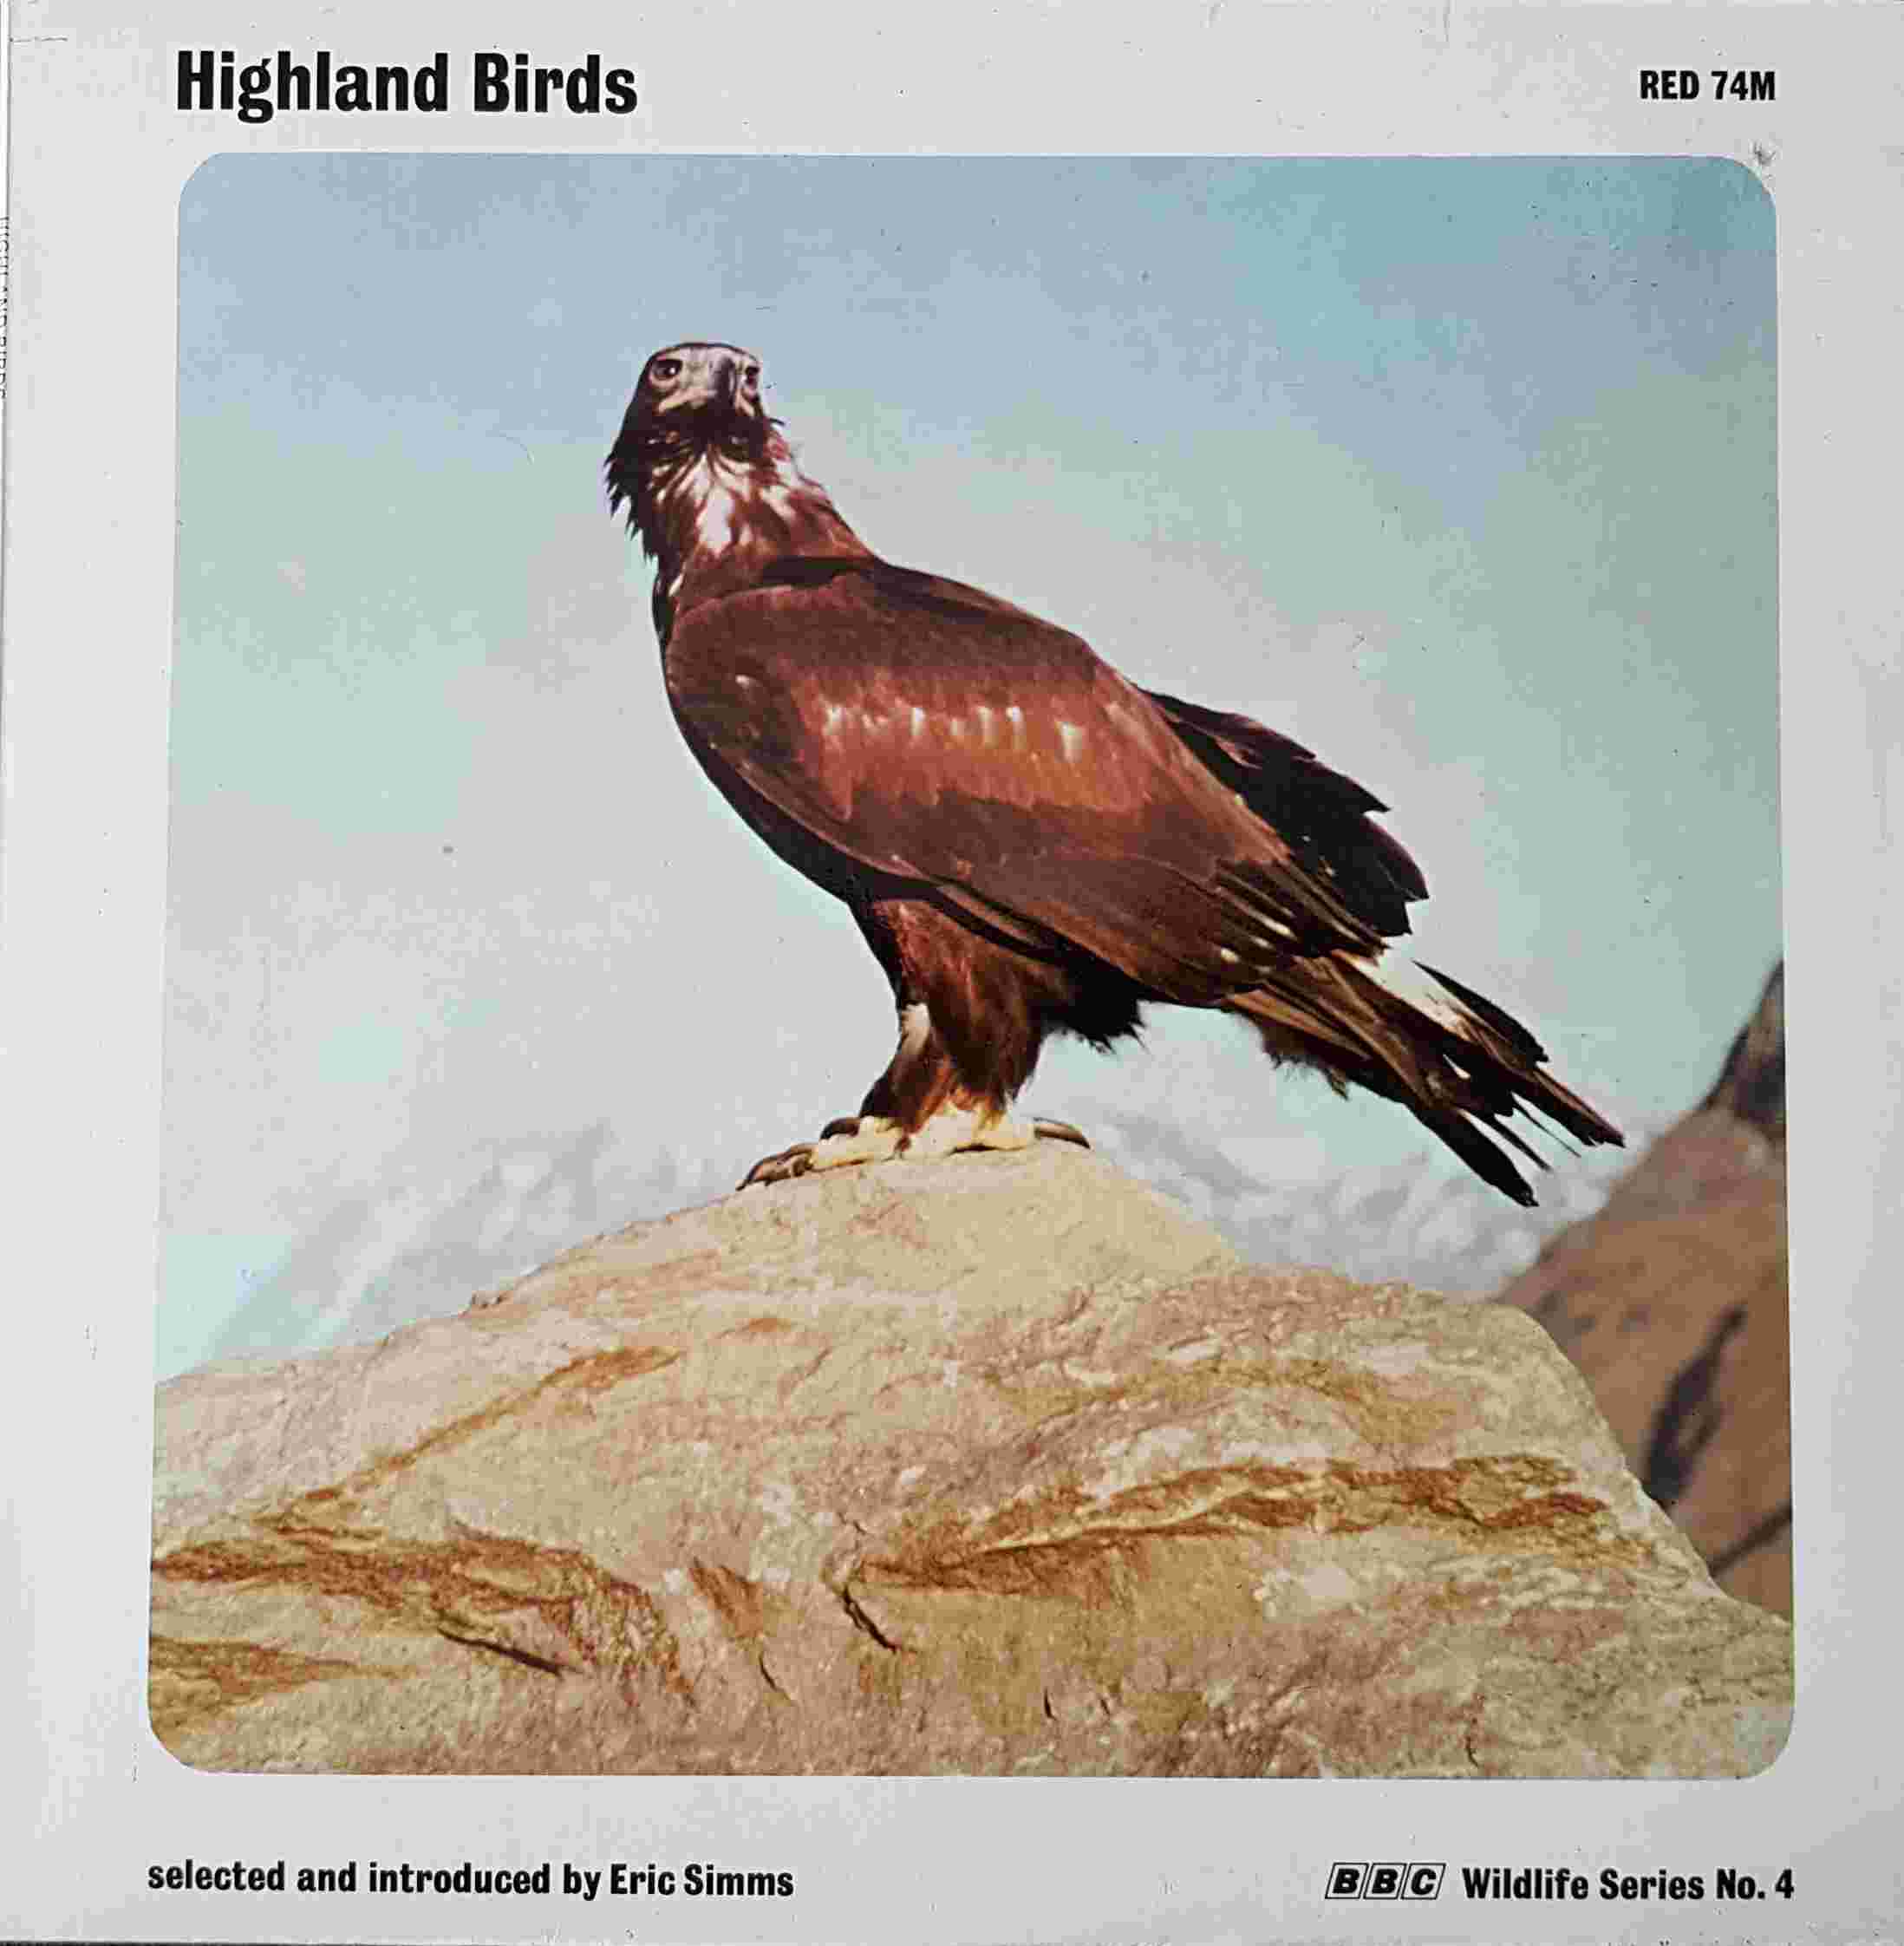 Picture of RED 74 Highland birds - BBC wildlife series no. 4 by artist Various from the BBC albums - Records and Tapes library